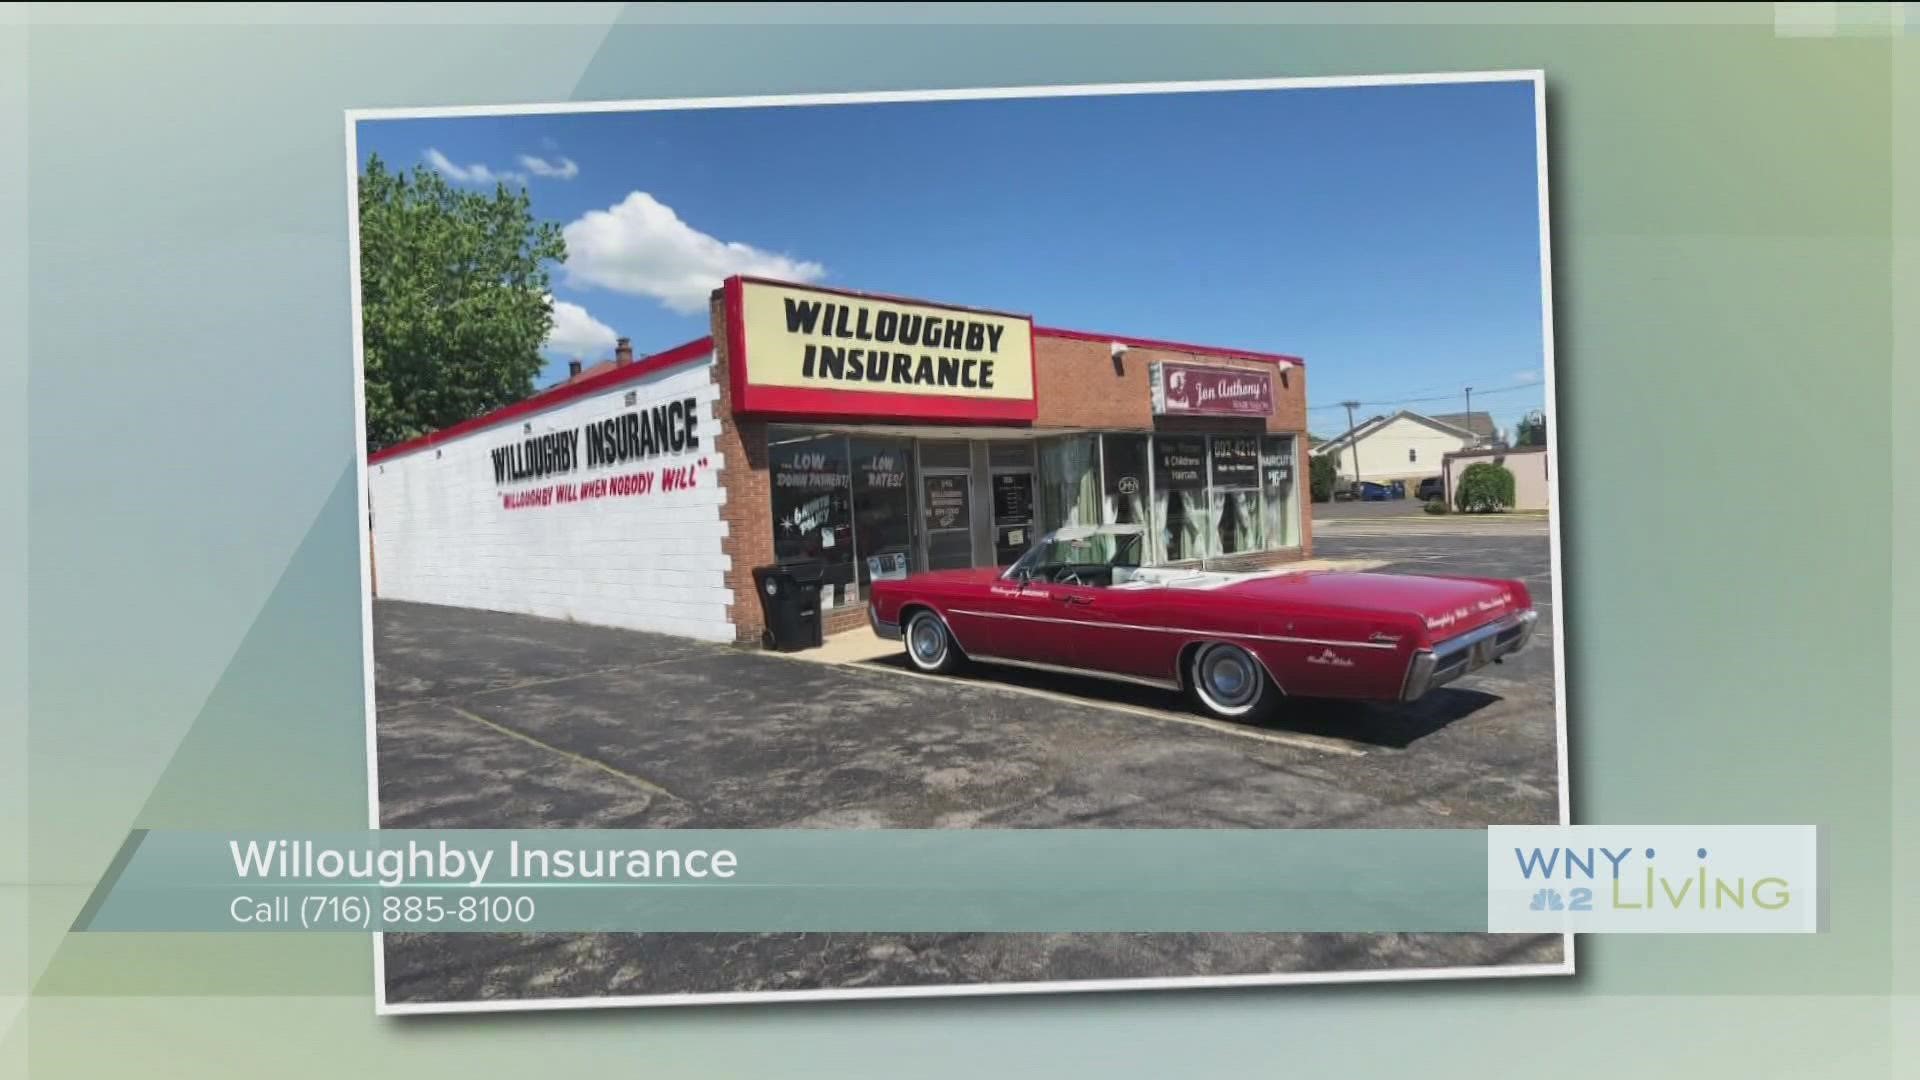 WNY Living - October 1 - Willoughby Insurance (THIS VIDEO IS SPONSORED BY WILLOUGHBY INSURANCE)